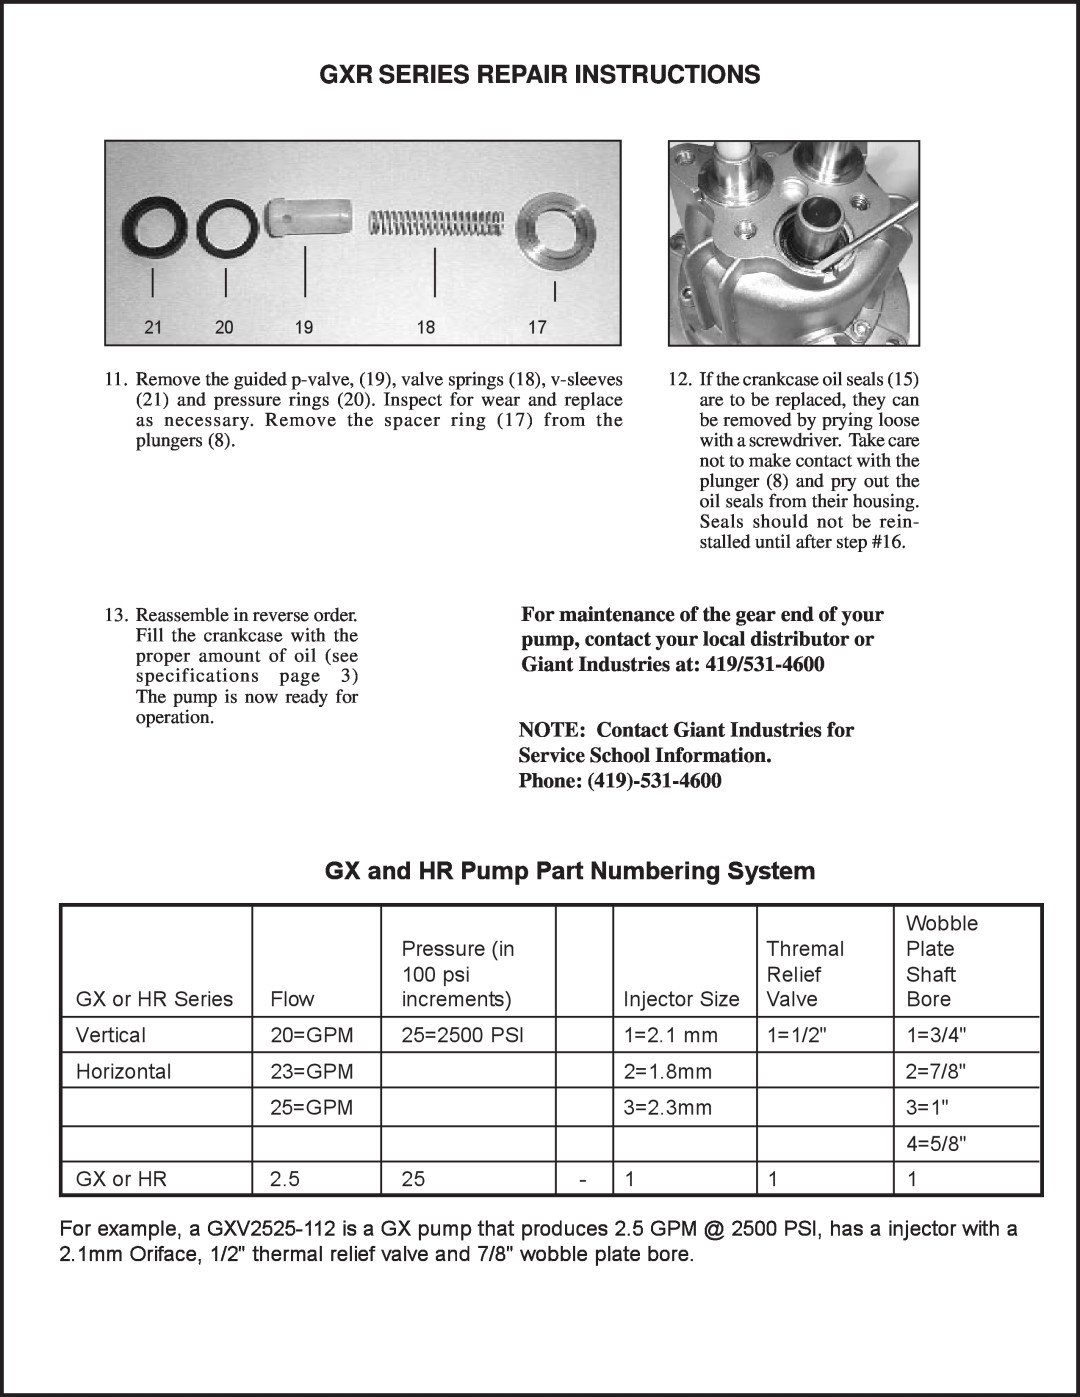 Giant GXR installation instructions Gxr Series Repair Instructions, GX and HR Pump Part Numbering System 